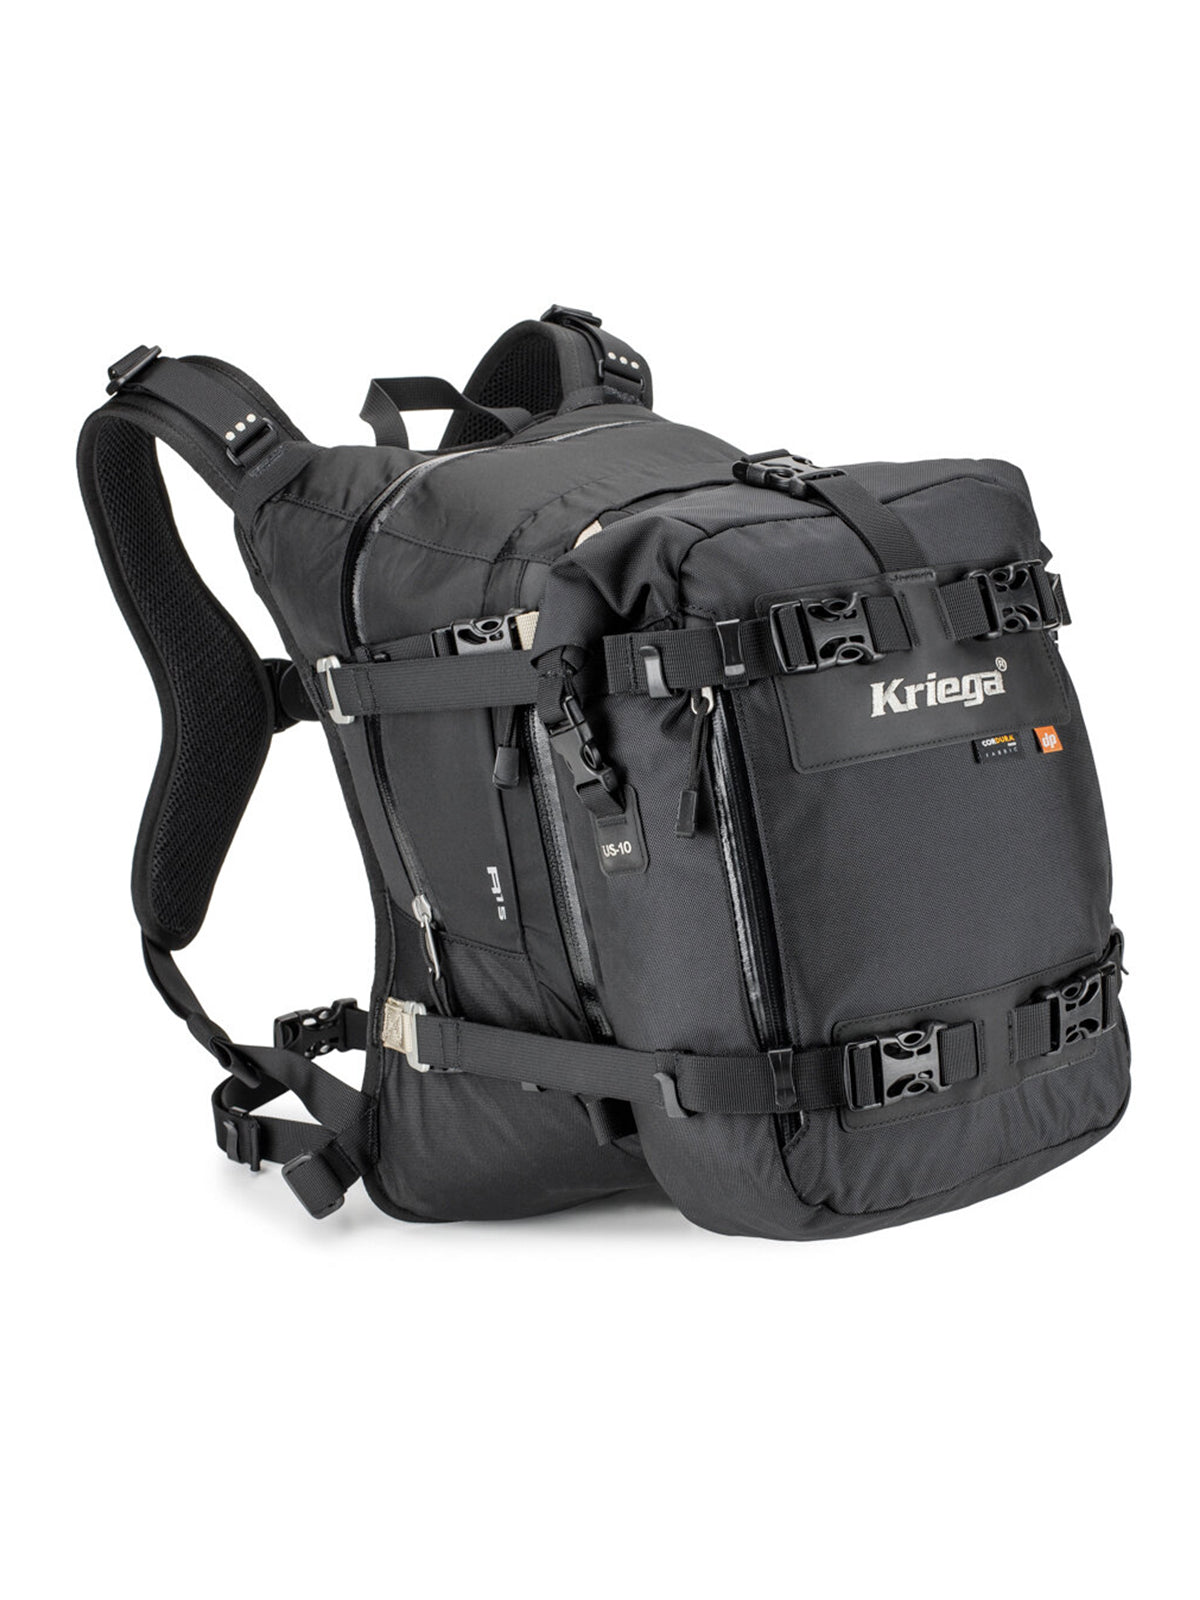 Kriega R15 Backpack with US10 fitted